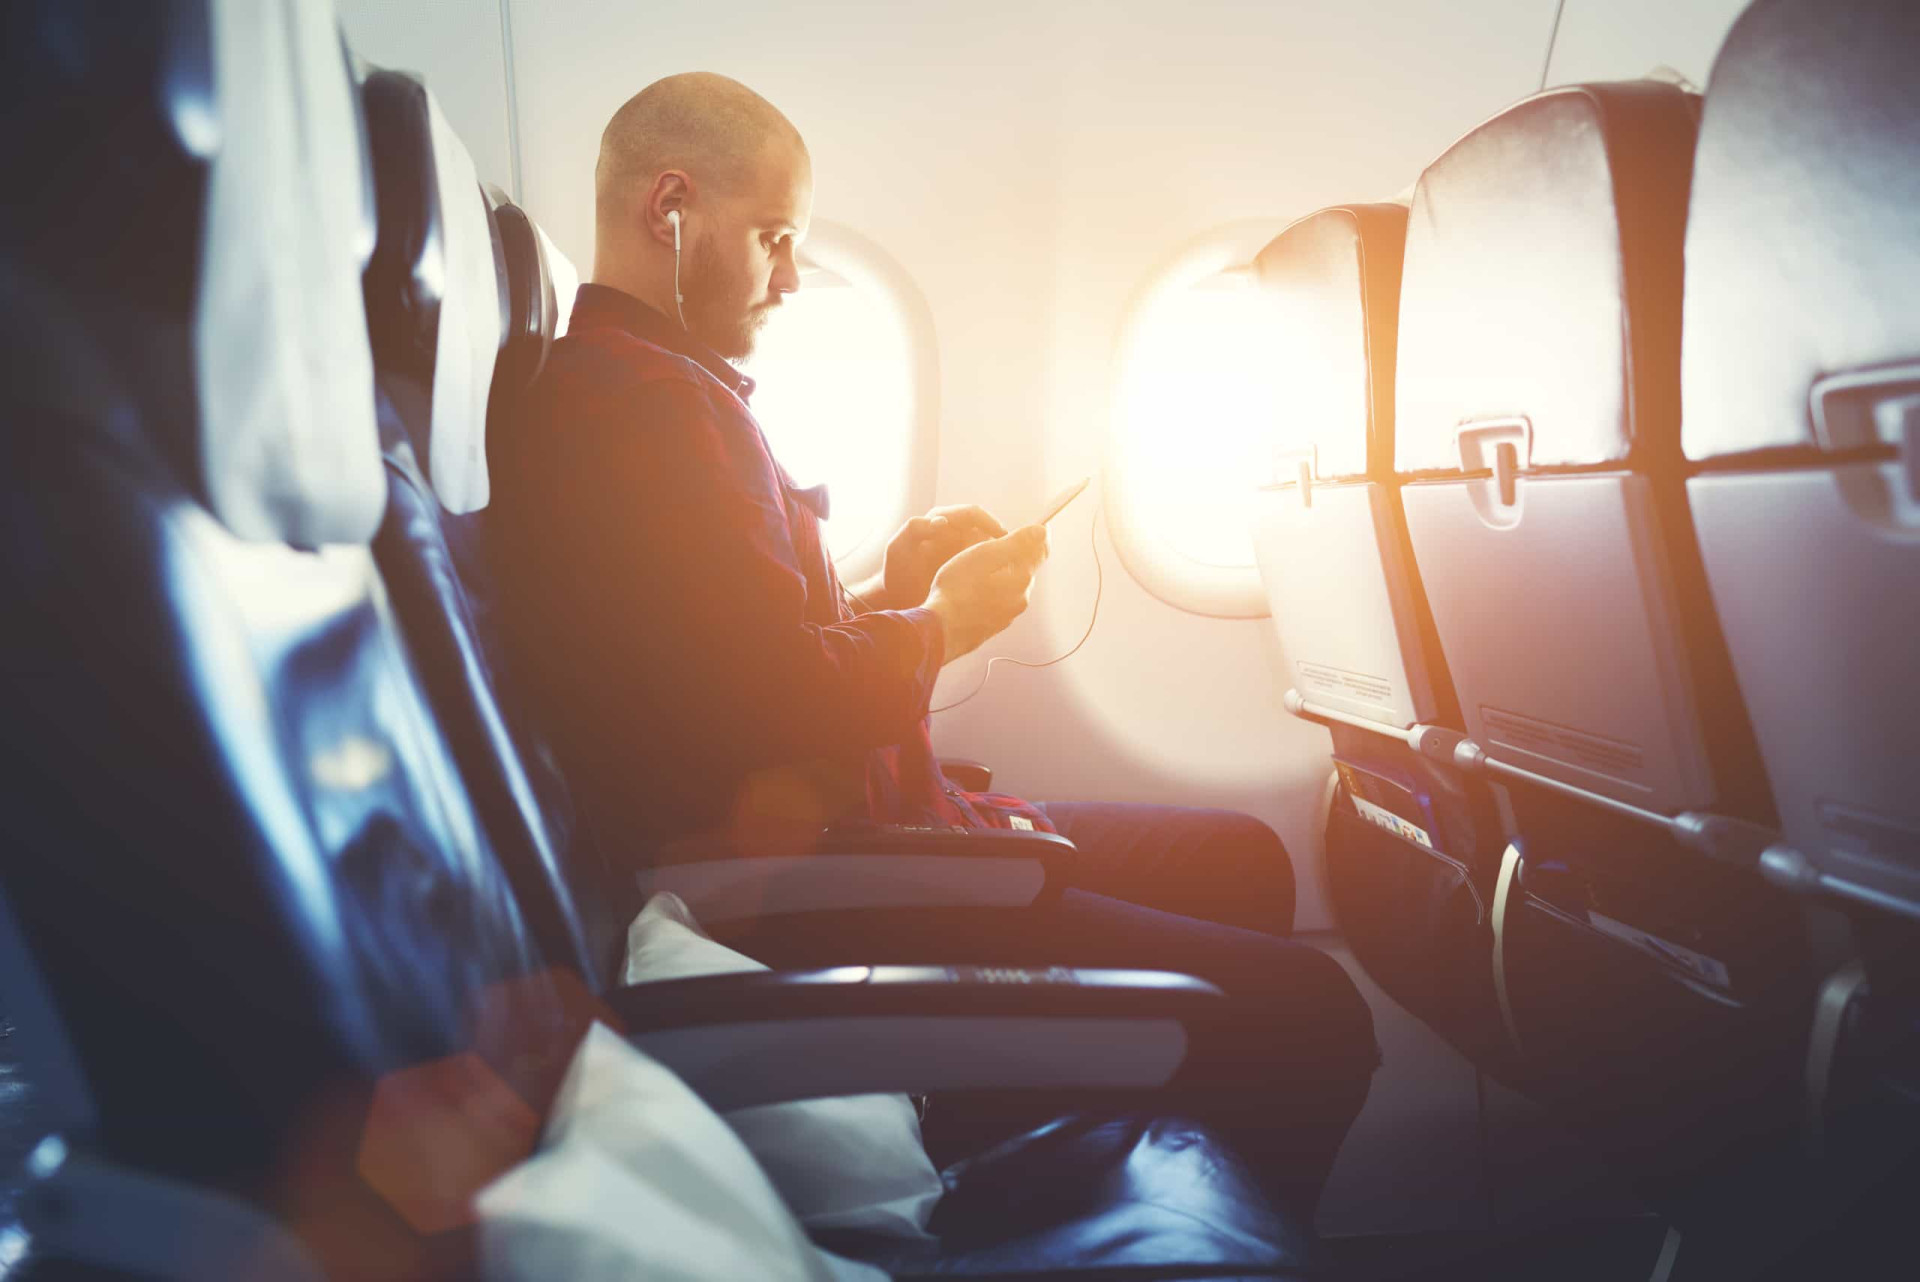 <div class="paragraph"> <p>In-flight entertainment systems are not always reliable. They sometimes fail, and sometimes they don't have the entertainment you want. You'll be glad to have some backup.</p> </div><p>You may also like:<a href="https://www.starsinsider.com/n/377750?utm_source=msn.com&utm_medium=display&utm_campaign=referral_description&utm_content=500296v1en-us"> Elvis Presley: the untold story of the King</a></p>